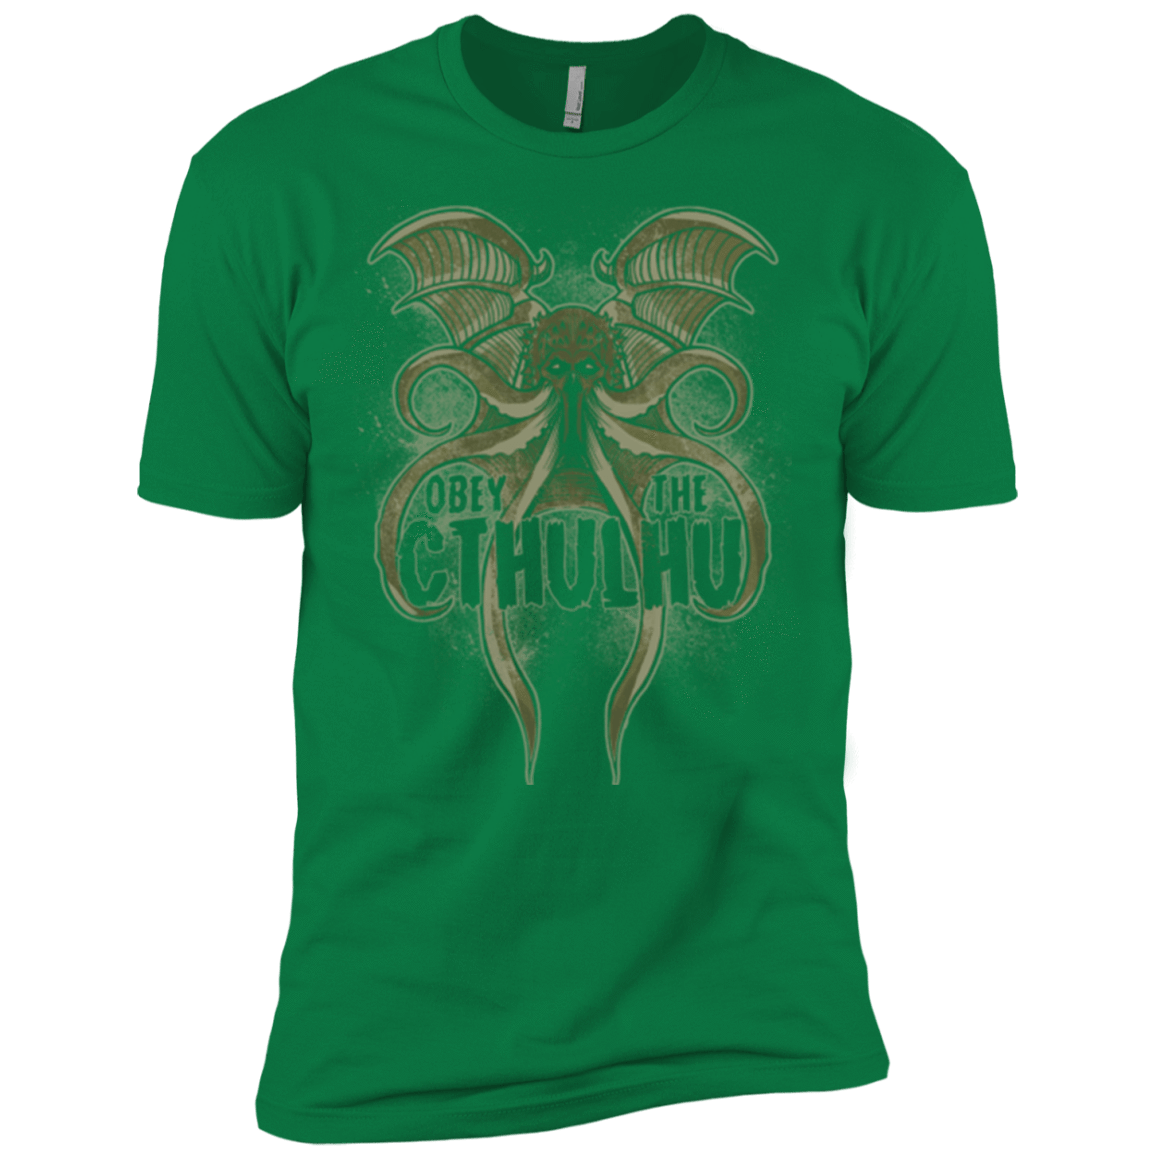 T-Shirts Kelly Green / X-Small Obey the Cthulhu Men's Premium T-Shirt